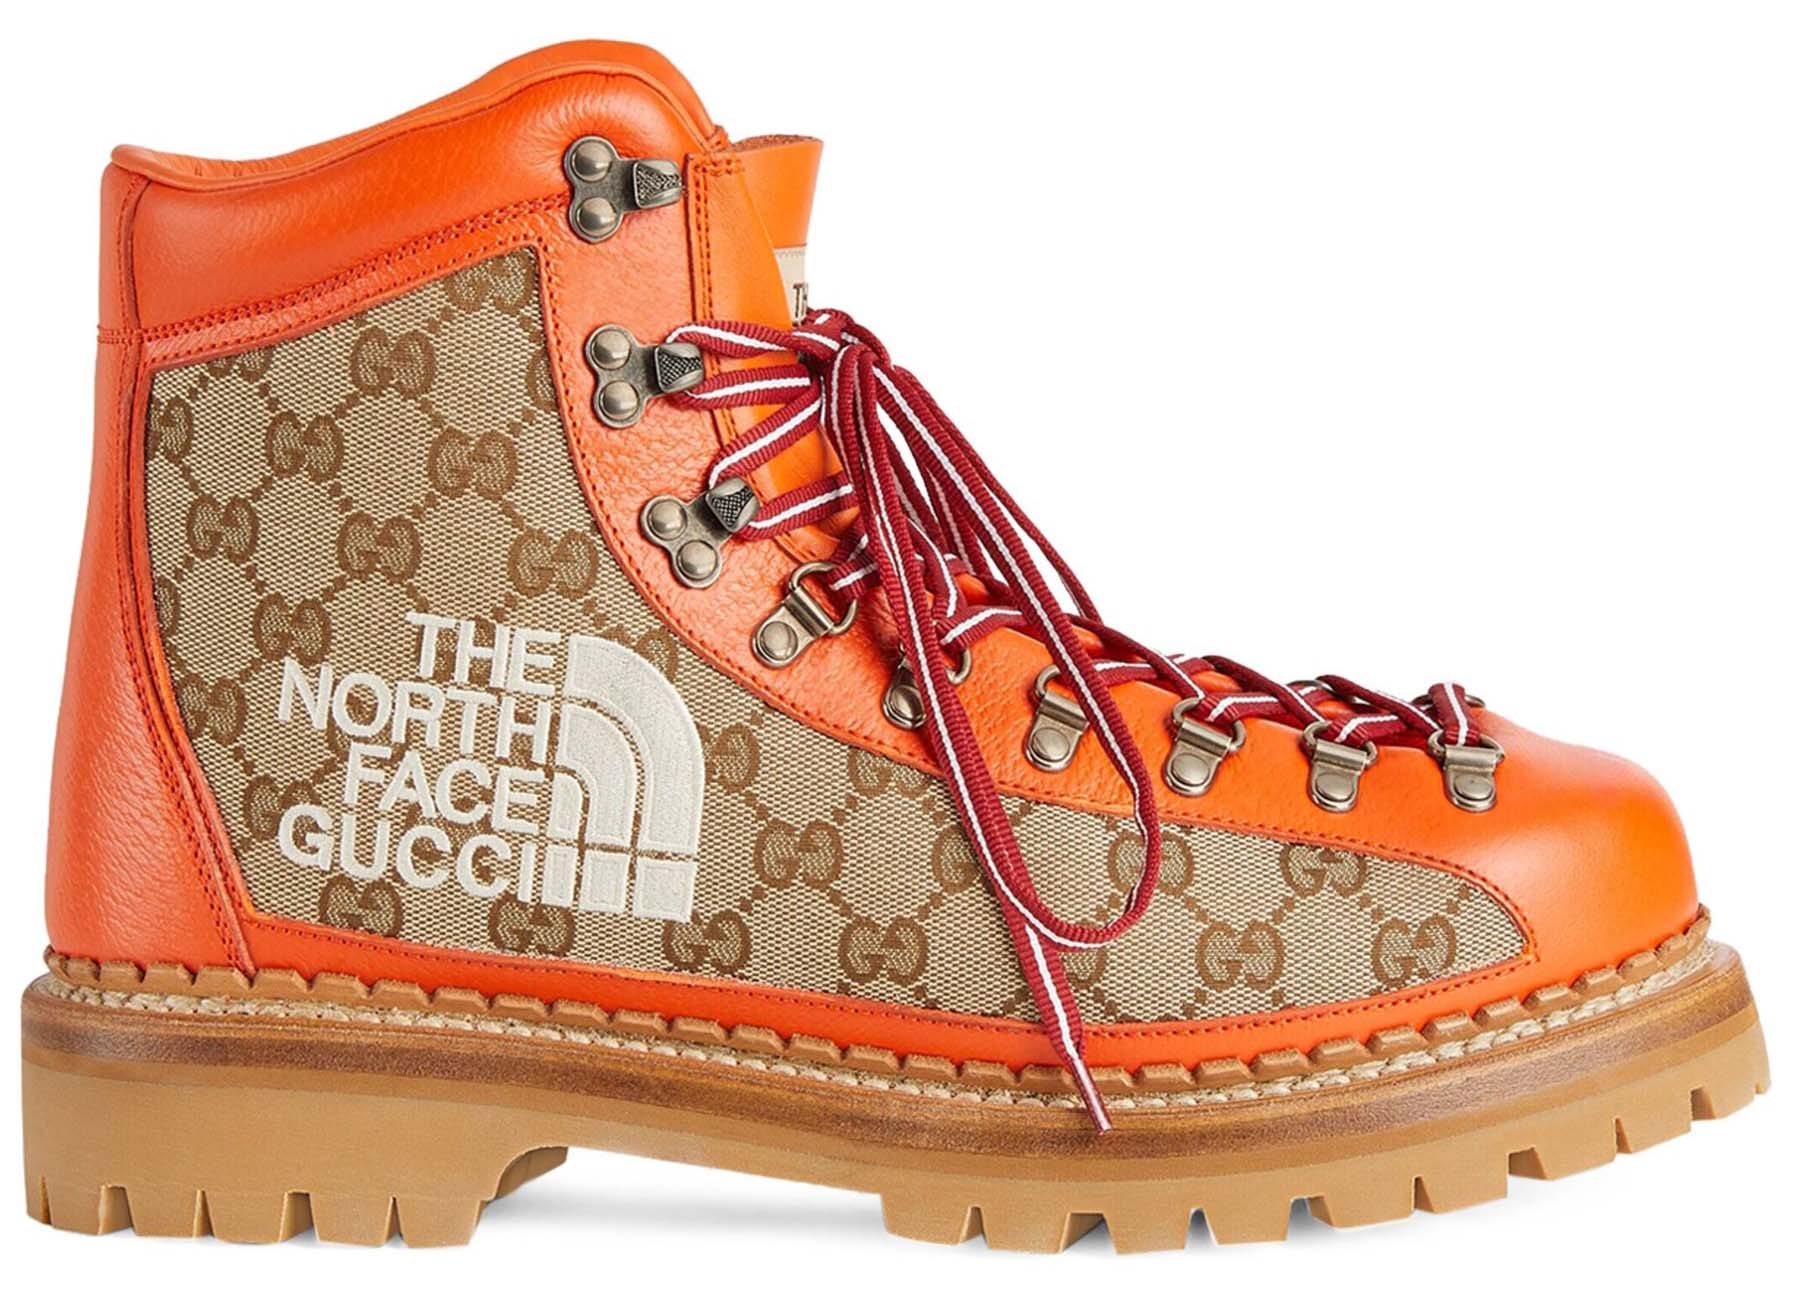 Gucci x The North Face Canvas Leather Boot Beige Orange (Women's)